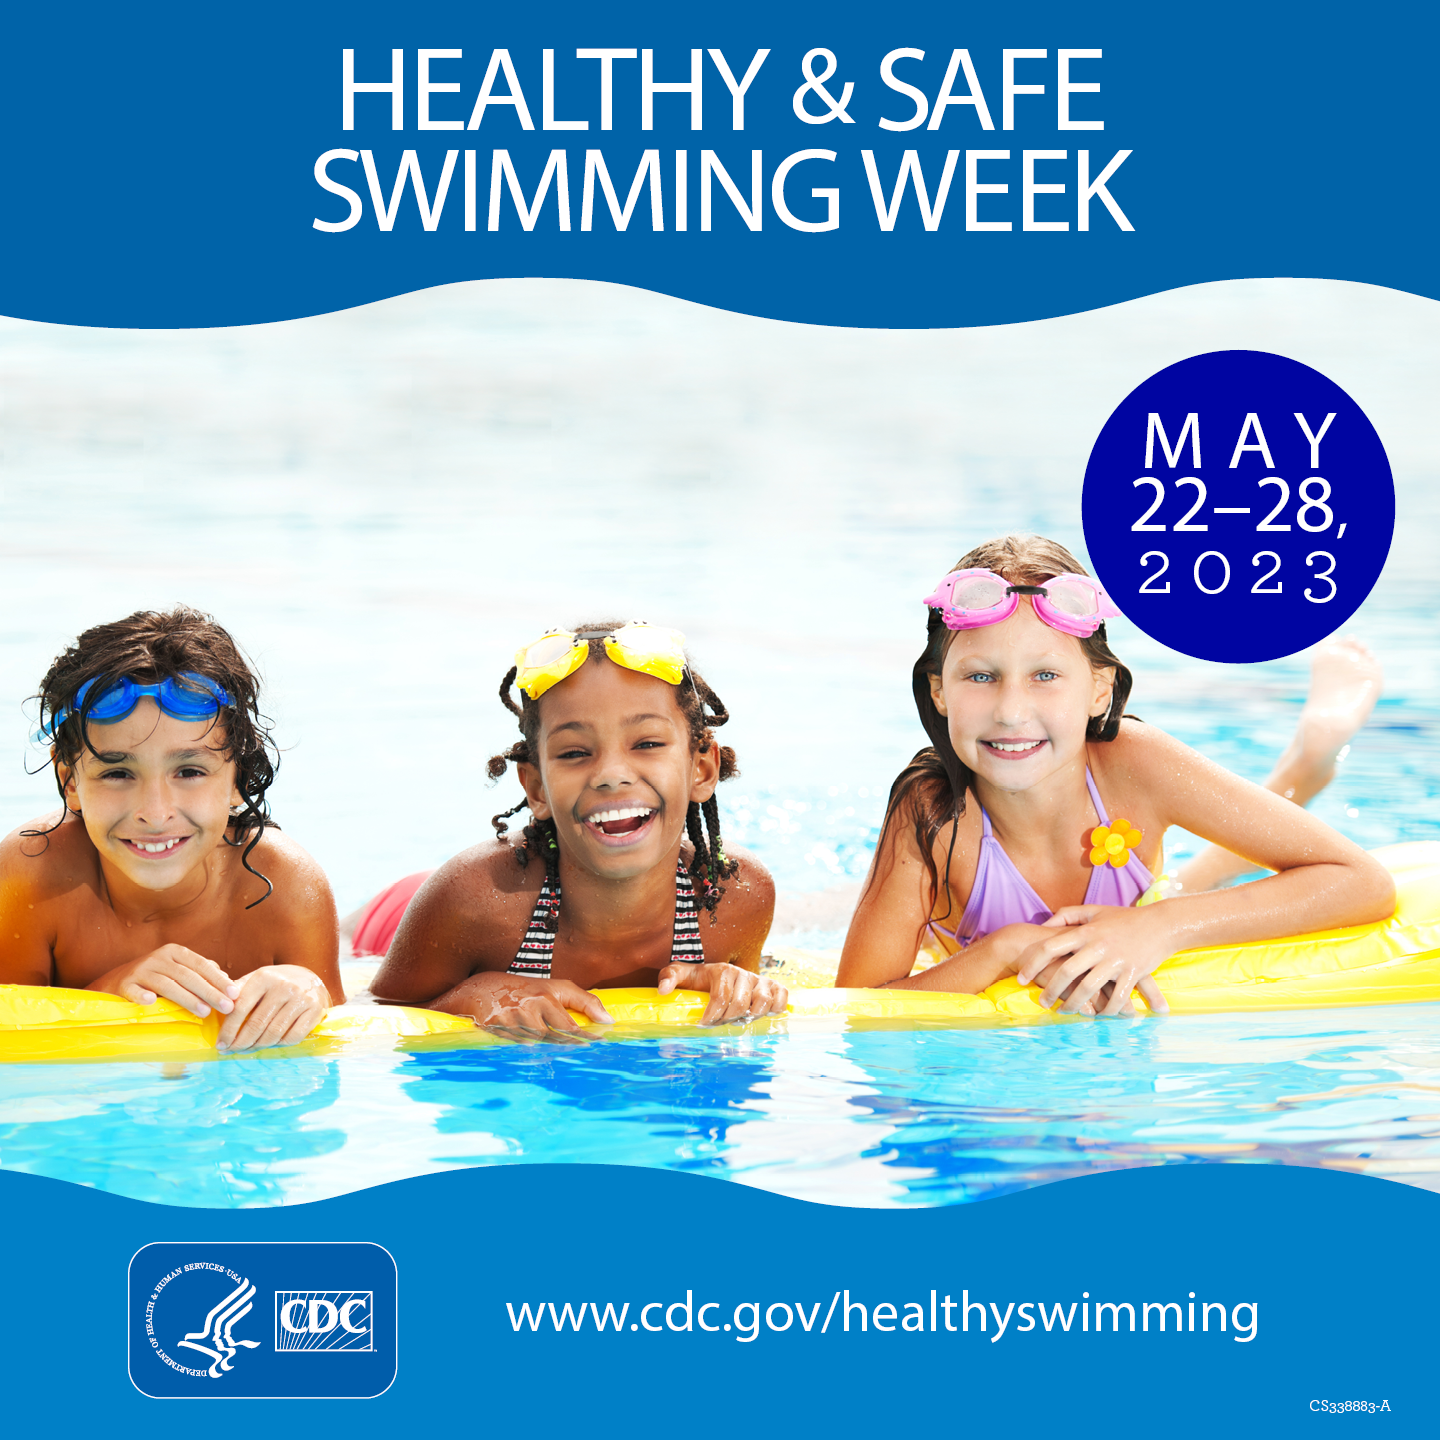 Three children smiling at the edge of a pool. Text:Healthy And Safe Swimming Week May 22-28, 2023. www.cdc.gov/healthyswimming.